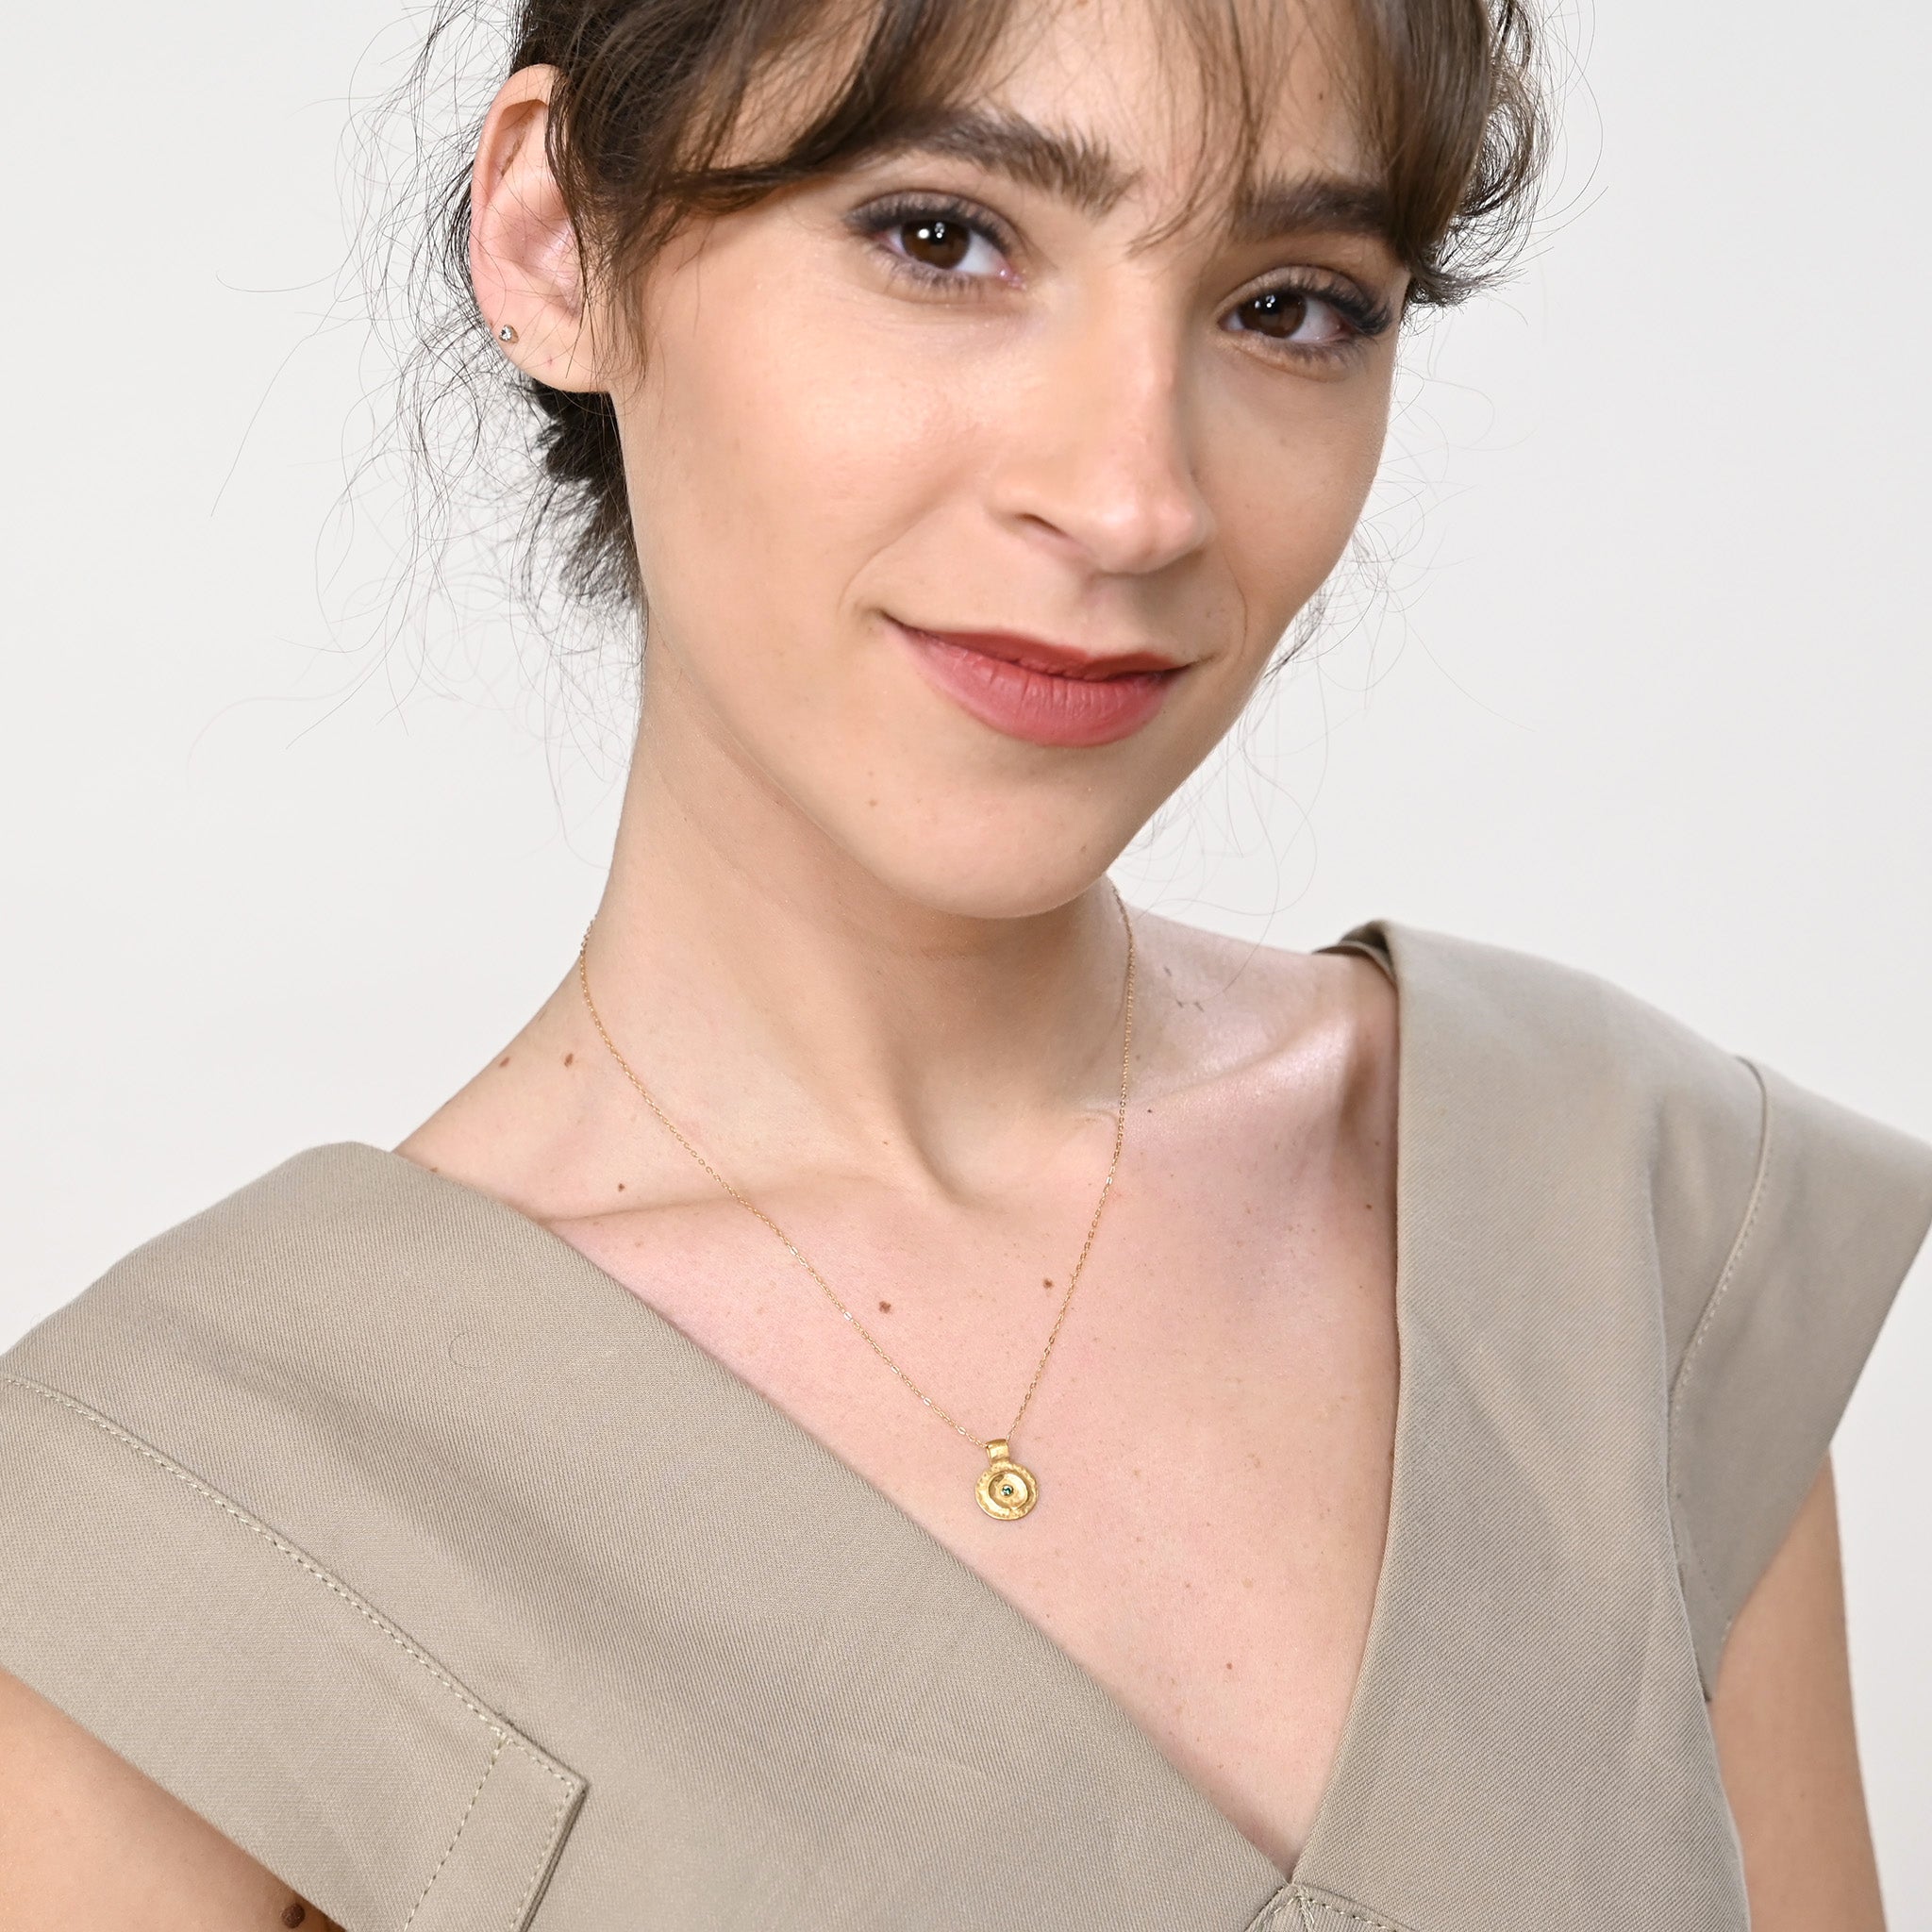 Model elegantly displaying the Pharaohs I ancient round gold pendant, featuring a central Emerald gemstone, drawing inspiration from the luxurious adornments of ancient Egyptian Pharaohs.